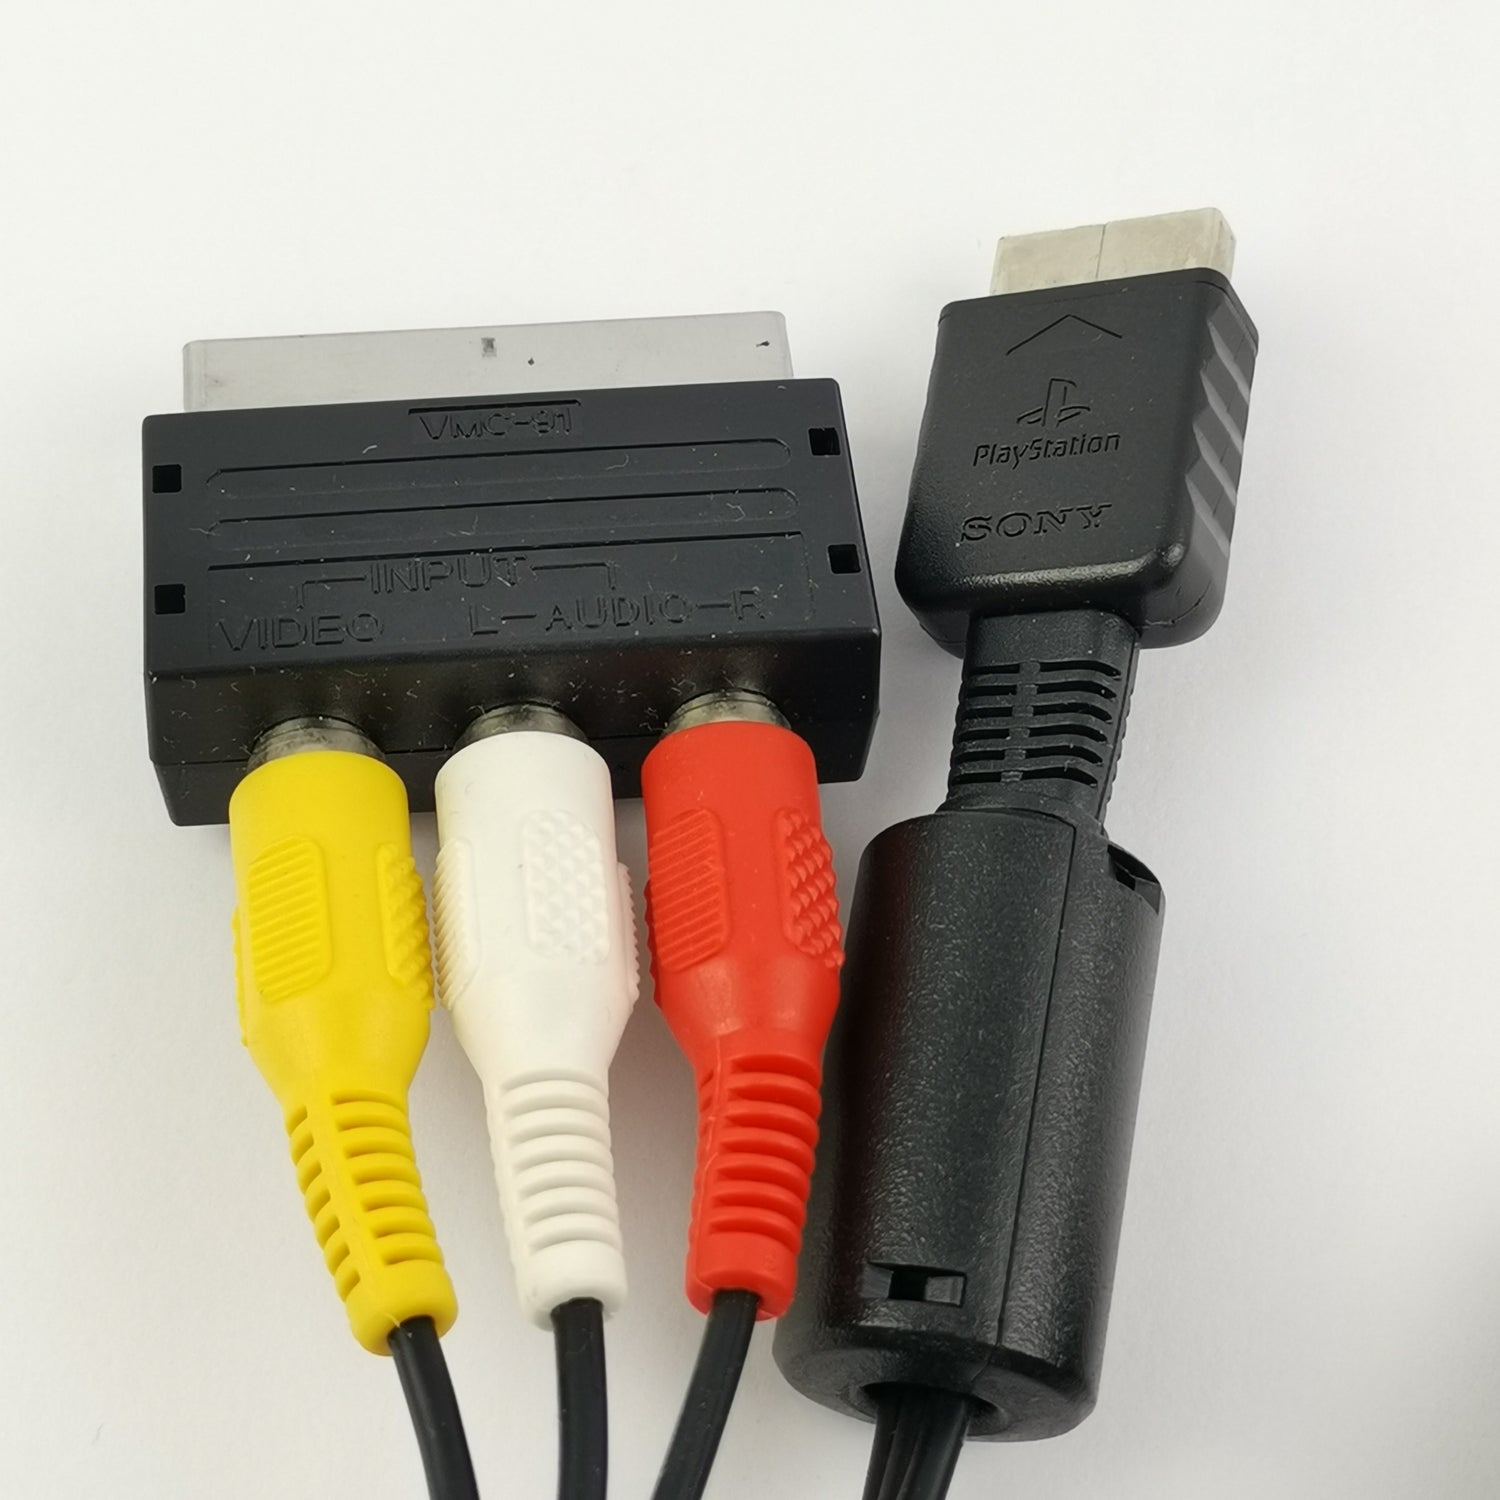 Sony Playstation 1 Accessories: Original cable set - AV and power cable